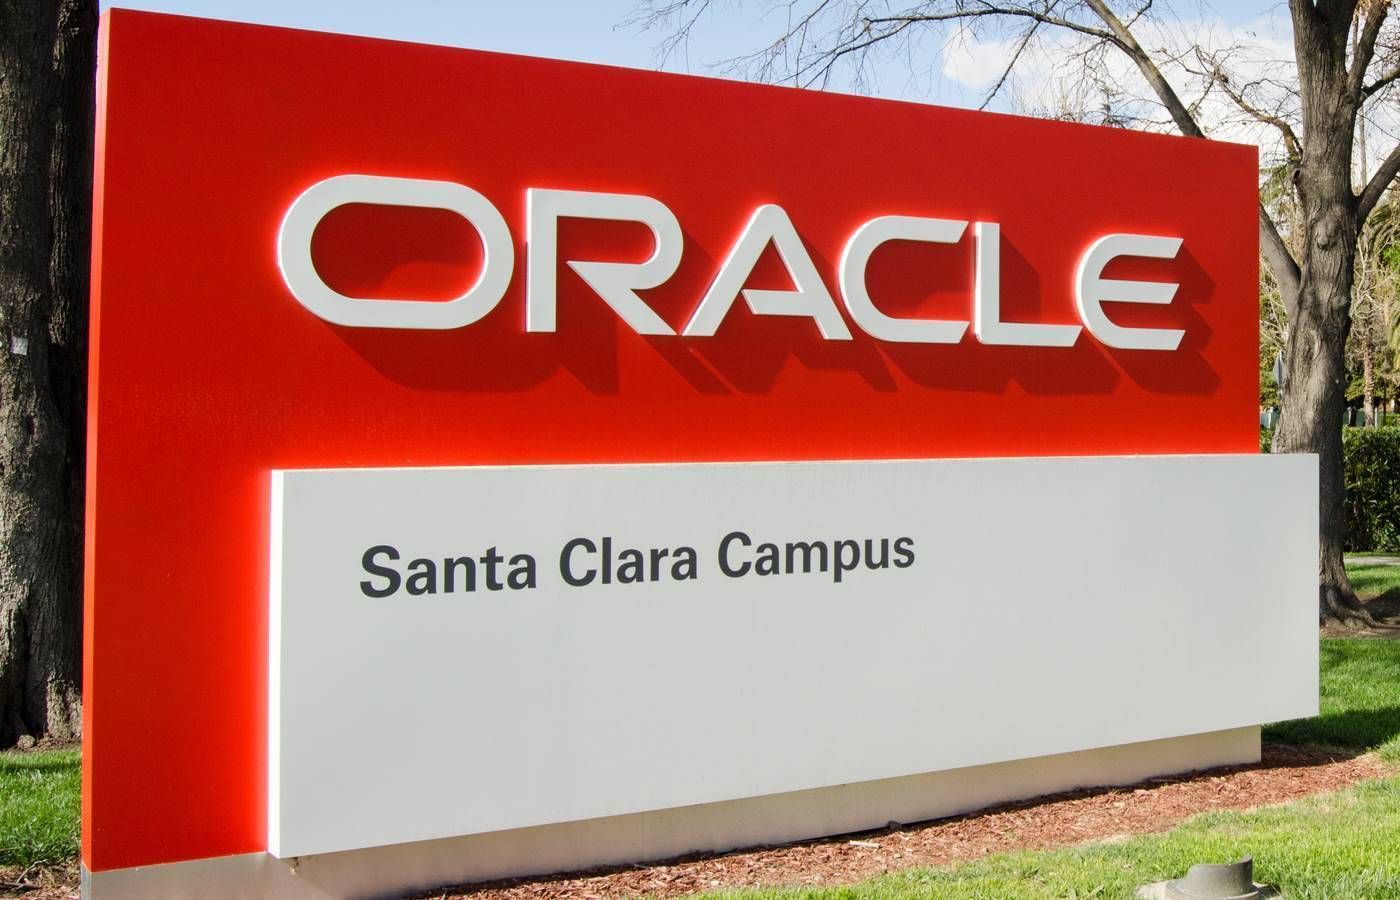 Oracle updates database technology for AI chatbots